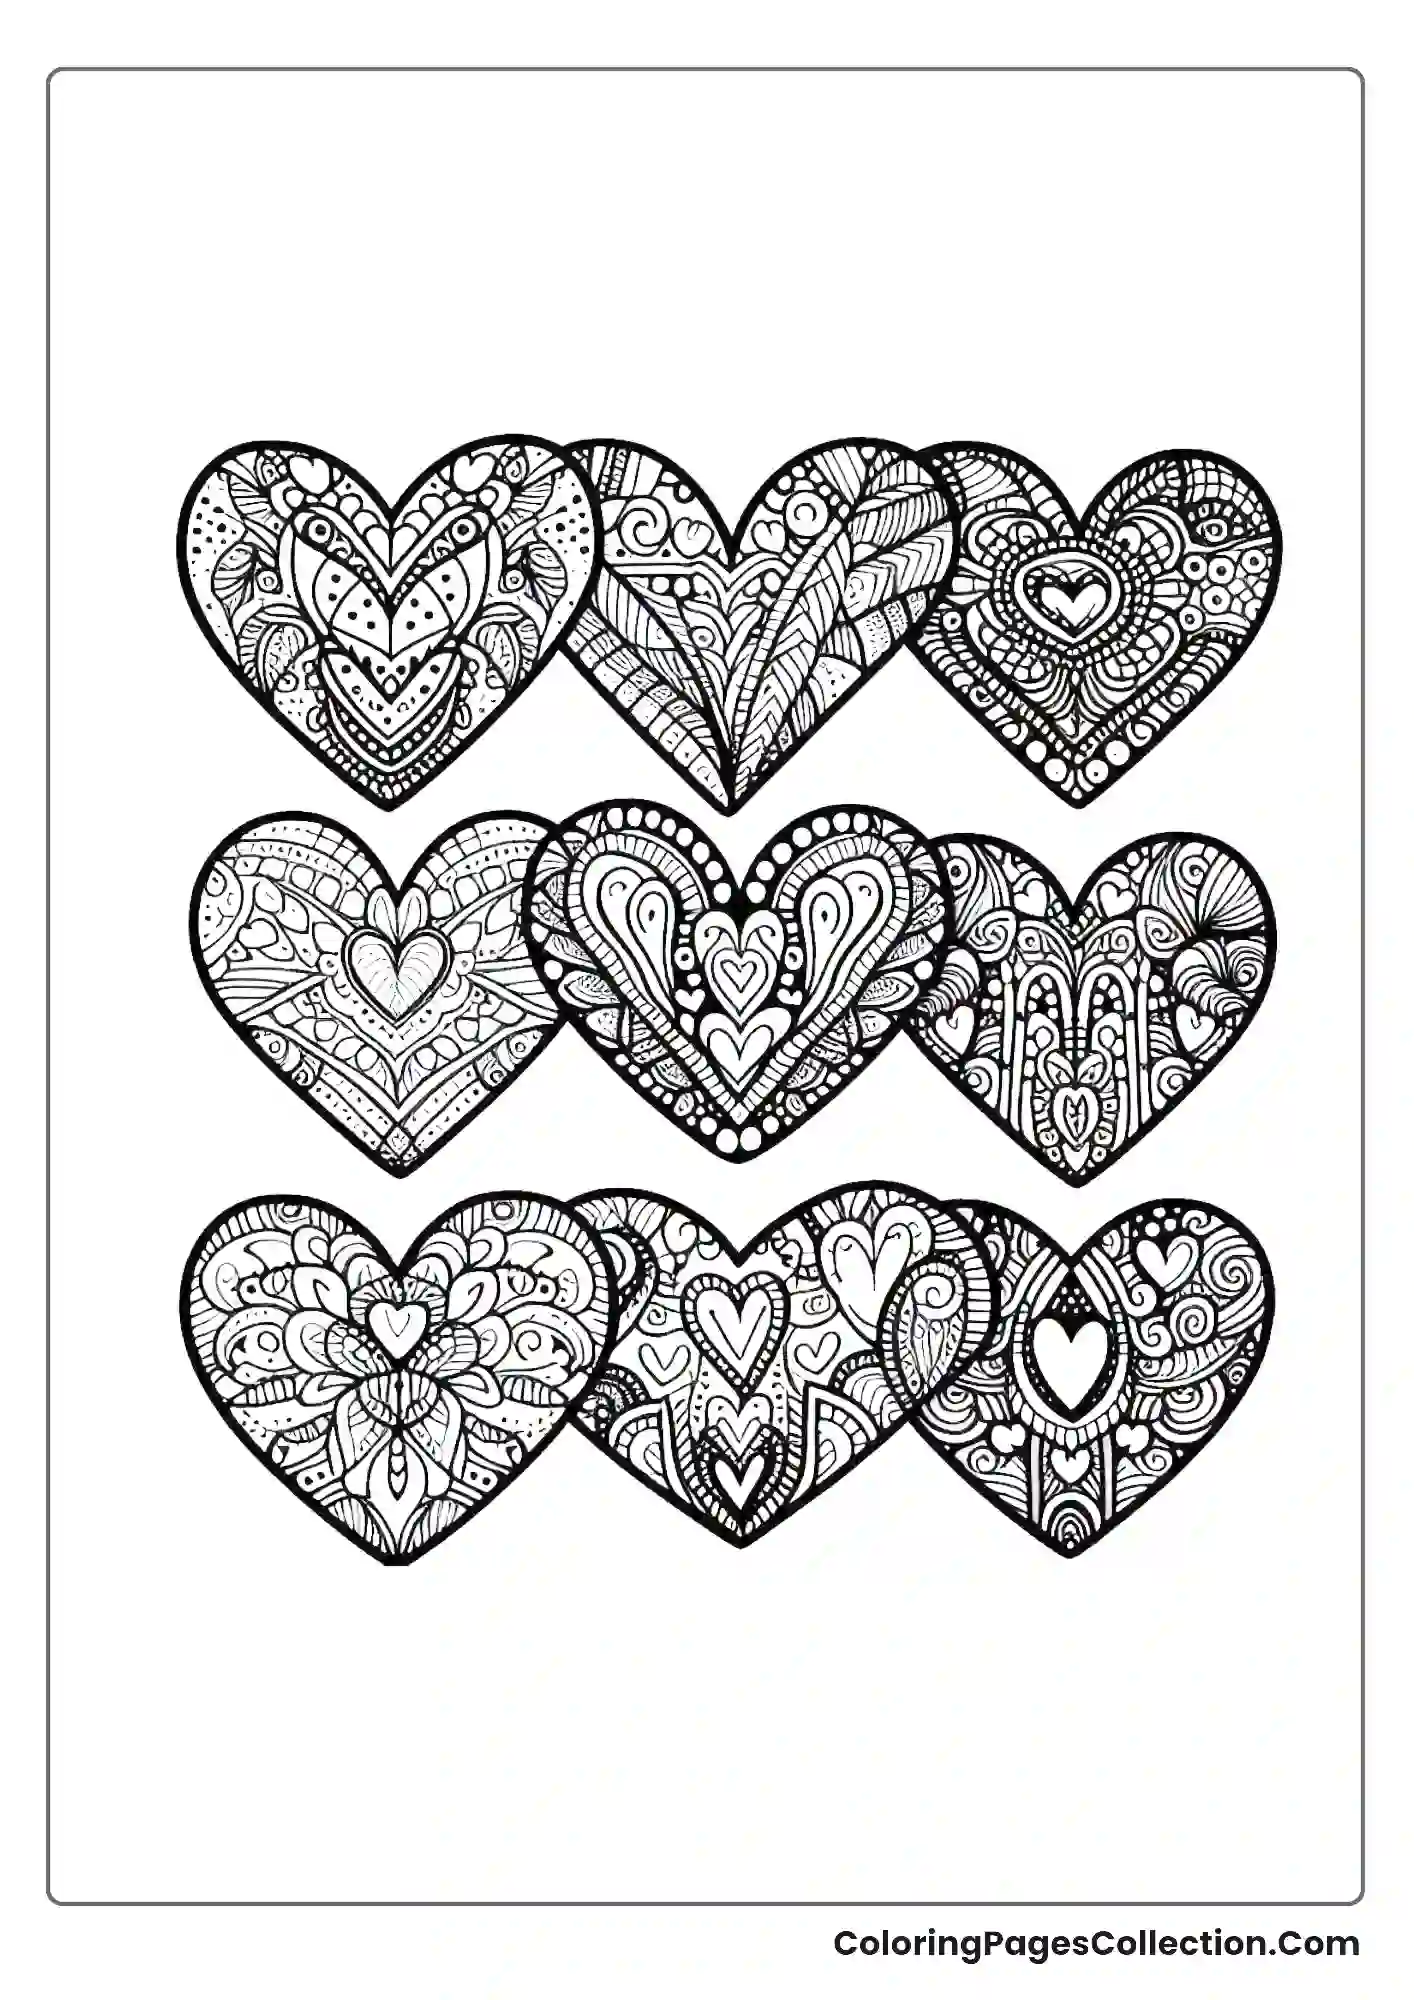 Multiple Small Hearts, Each With A Different Zentangle Design